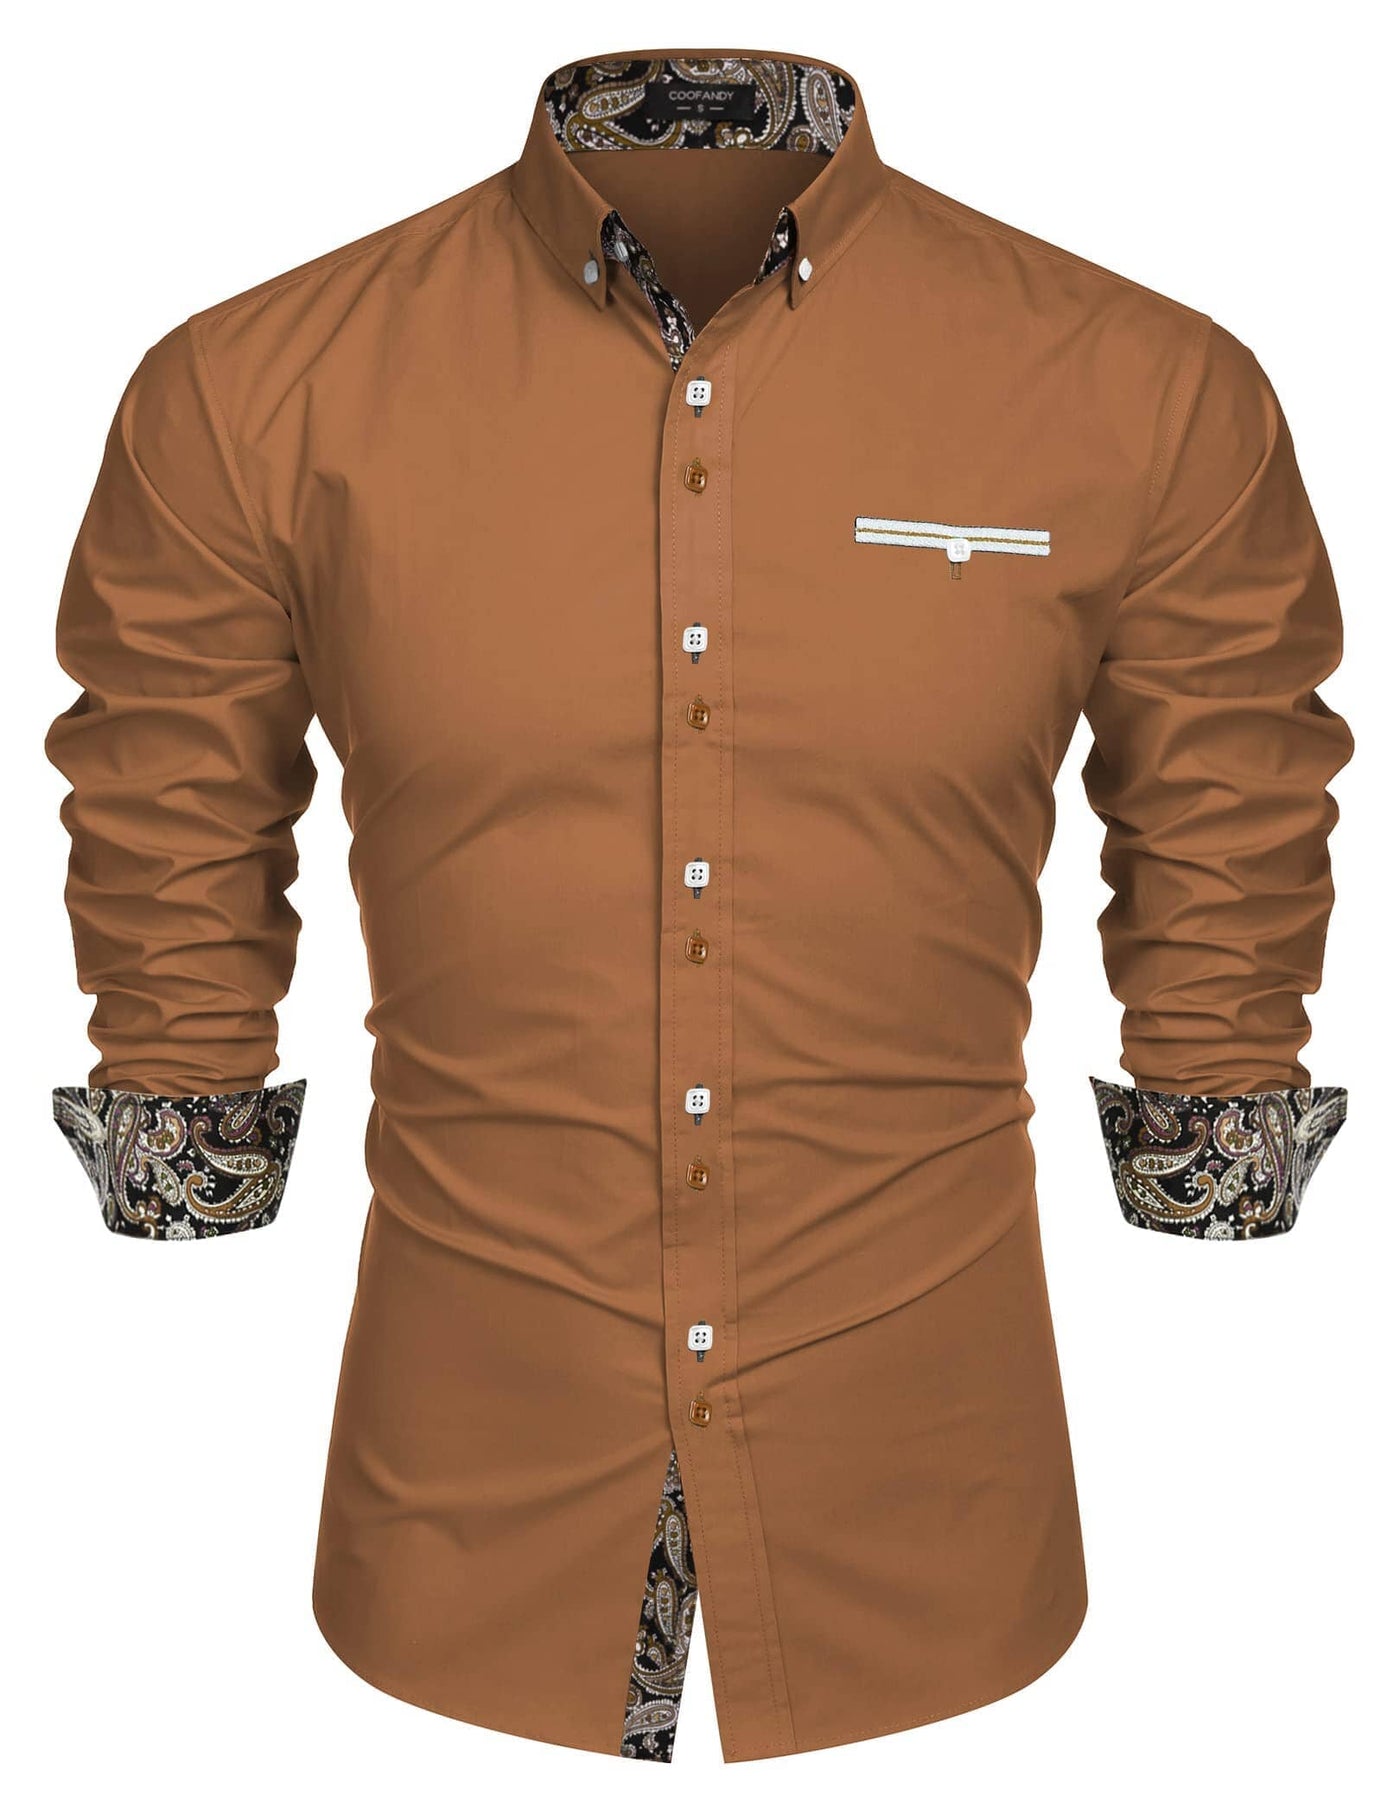 Coofandy Dress Button Down Shirts (US Only) Shirts coofandy Brown S 